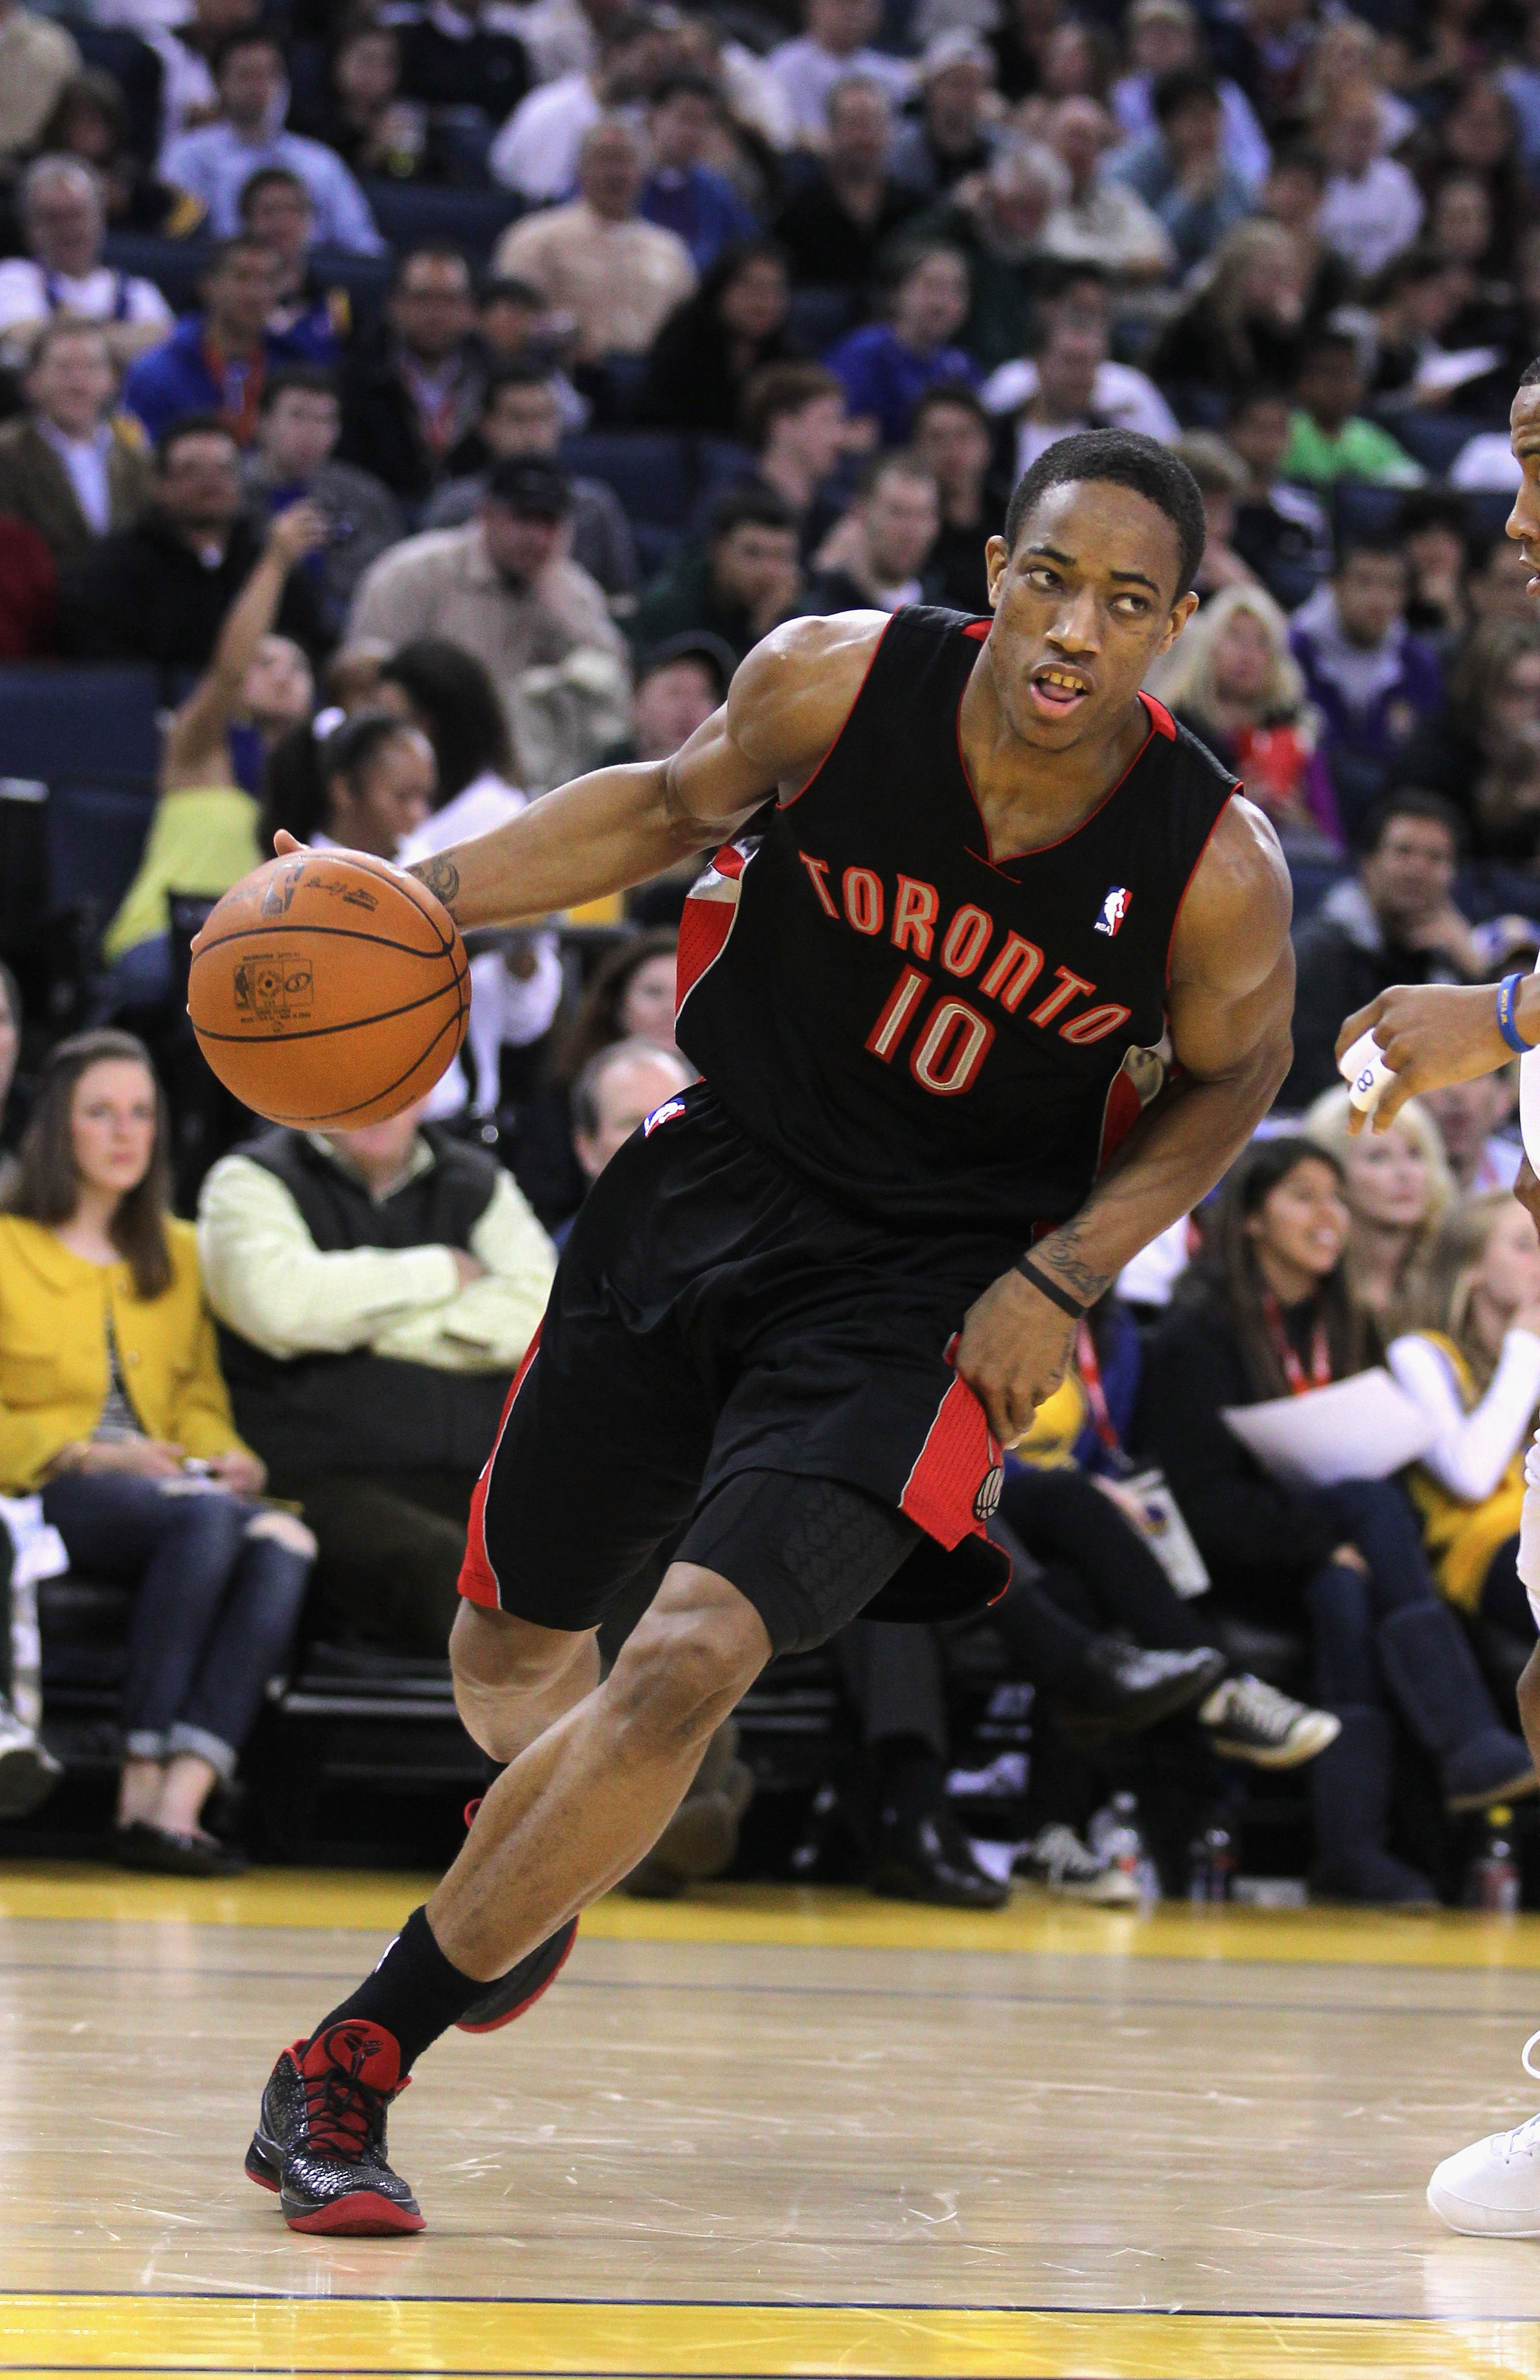 Report: DeRozan officially opts out of contract with Raptors